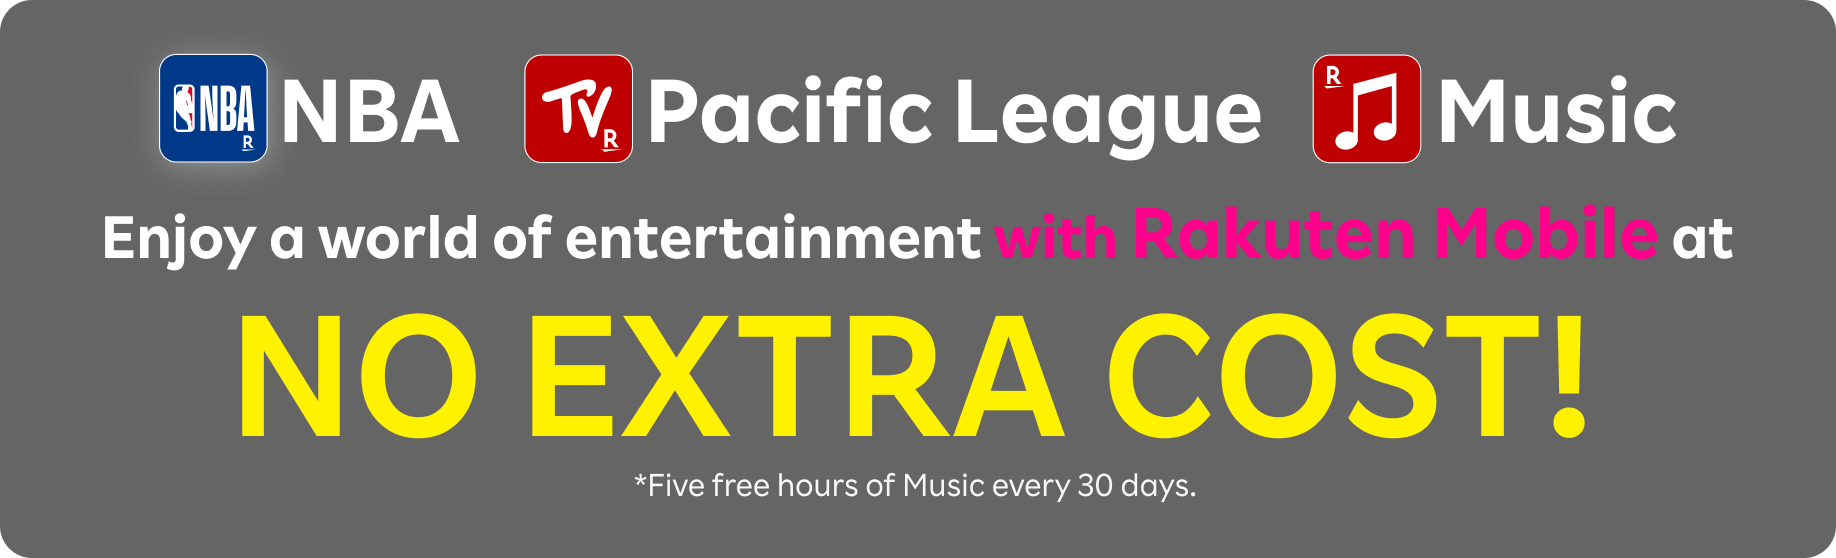 NBA,Pacific League,Music.Enjoy a world of entertainment with Rakuten Mobile at NO EXTRA COST! *Five free hours of Music every 30 days.